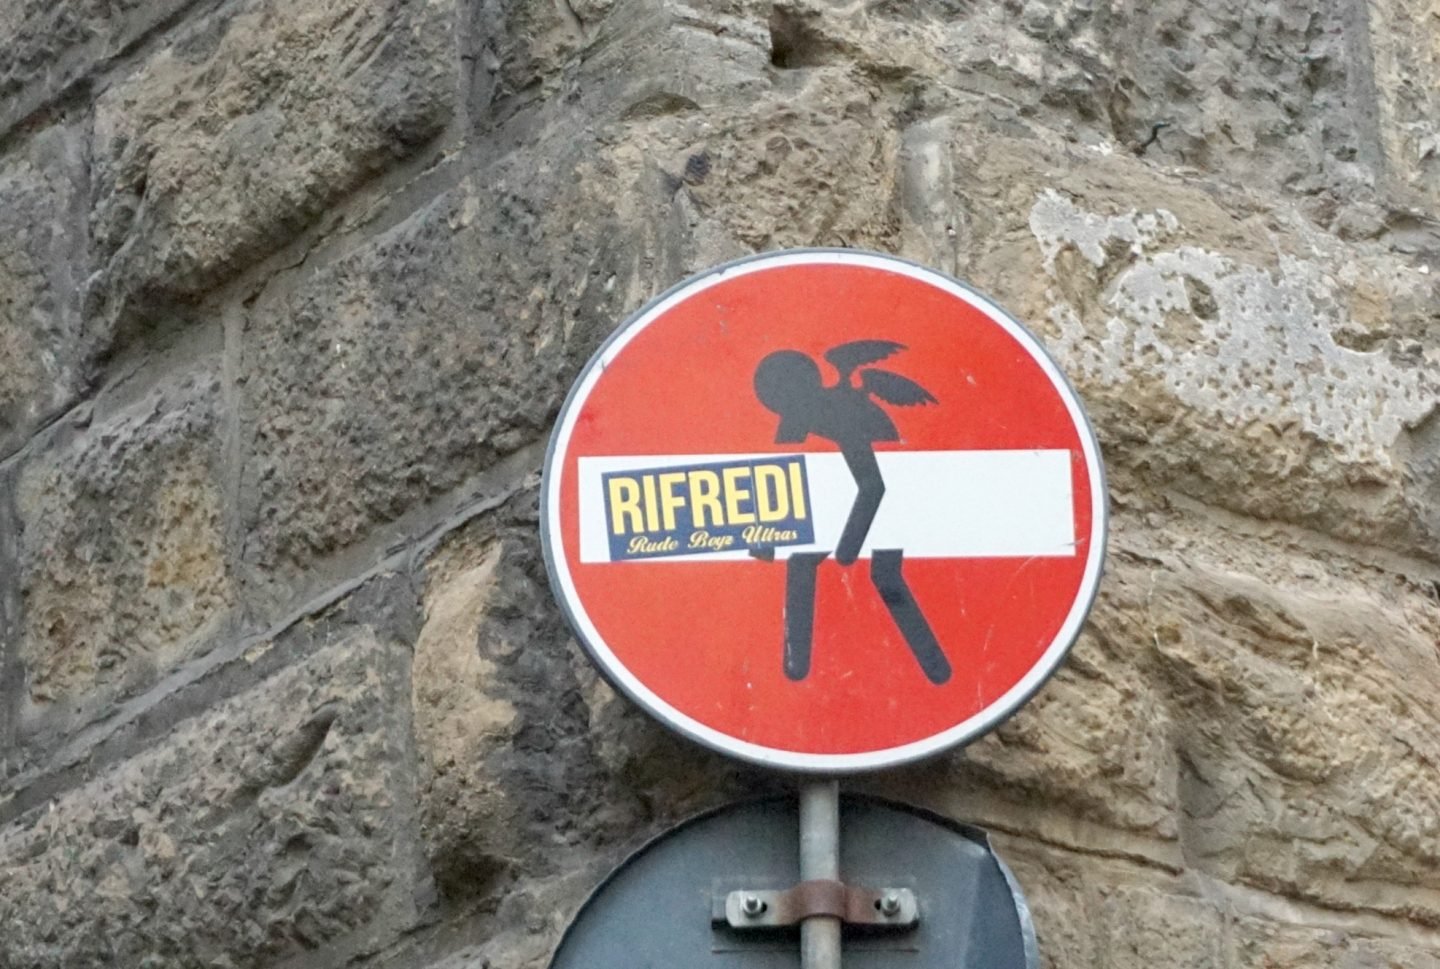 No Entry Sign street art in Florence www.extraordianrychaos.com